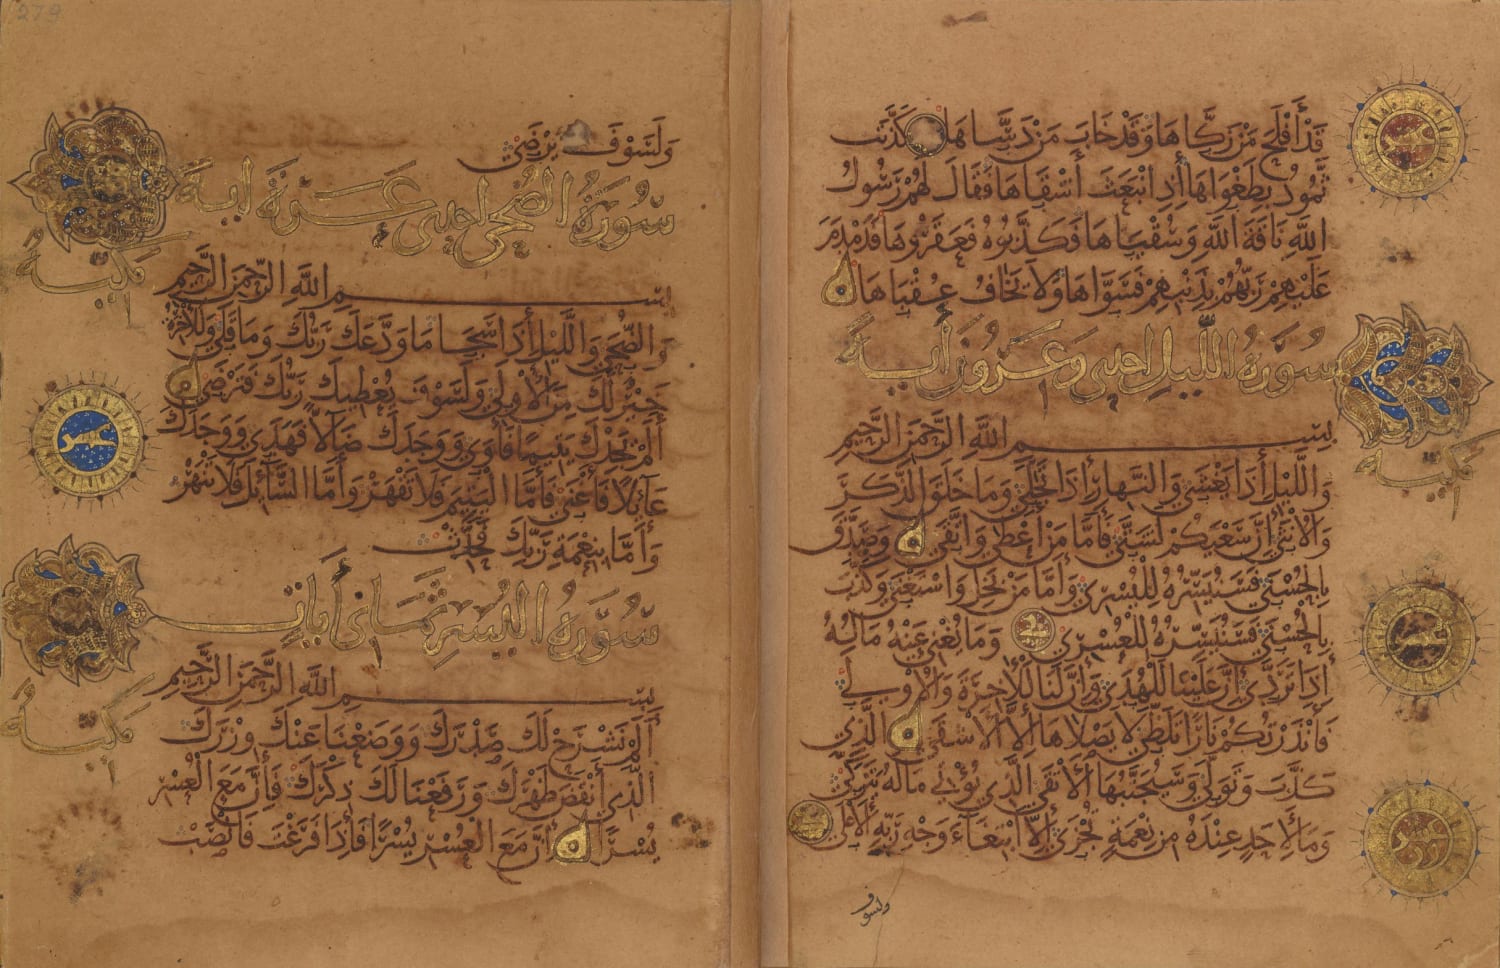 The quran of Ibn Al-Bawwab, a persian calligrapher and illuminator who lived during the time of the Buyid dynasty. It is the earliest existing example of a quran written in a cursive script. 11th century CE, now on display at the Chester Beatty Library